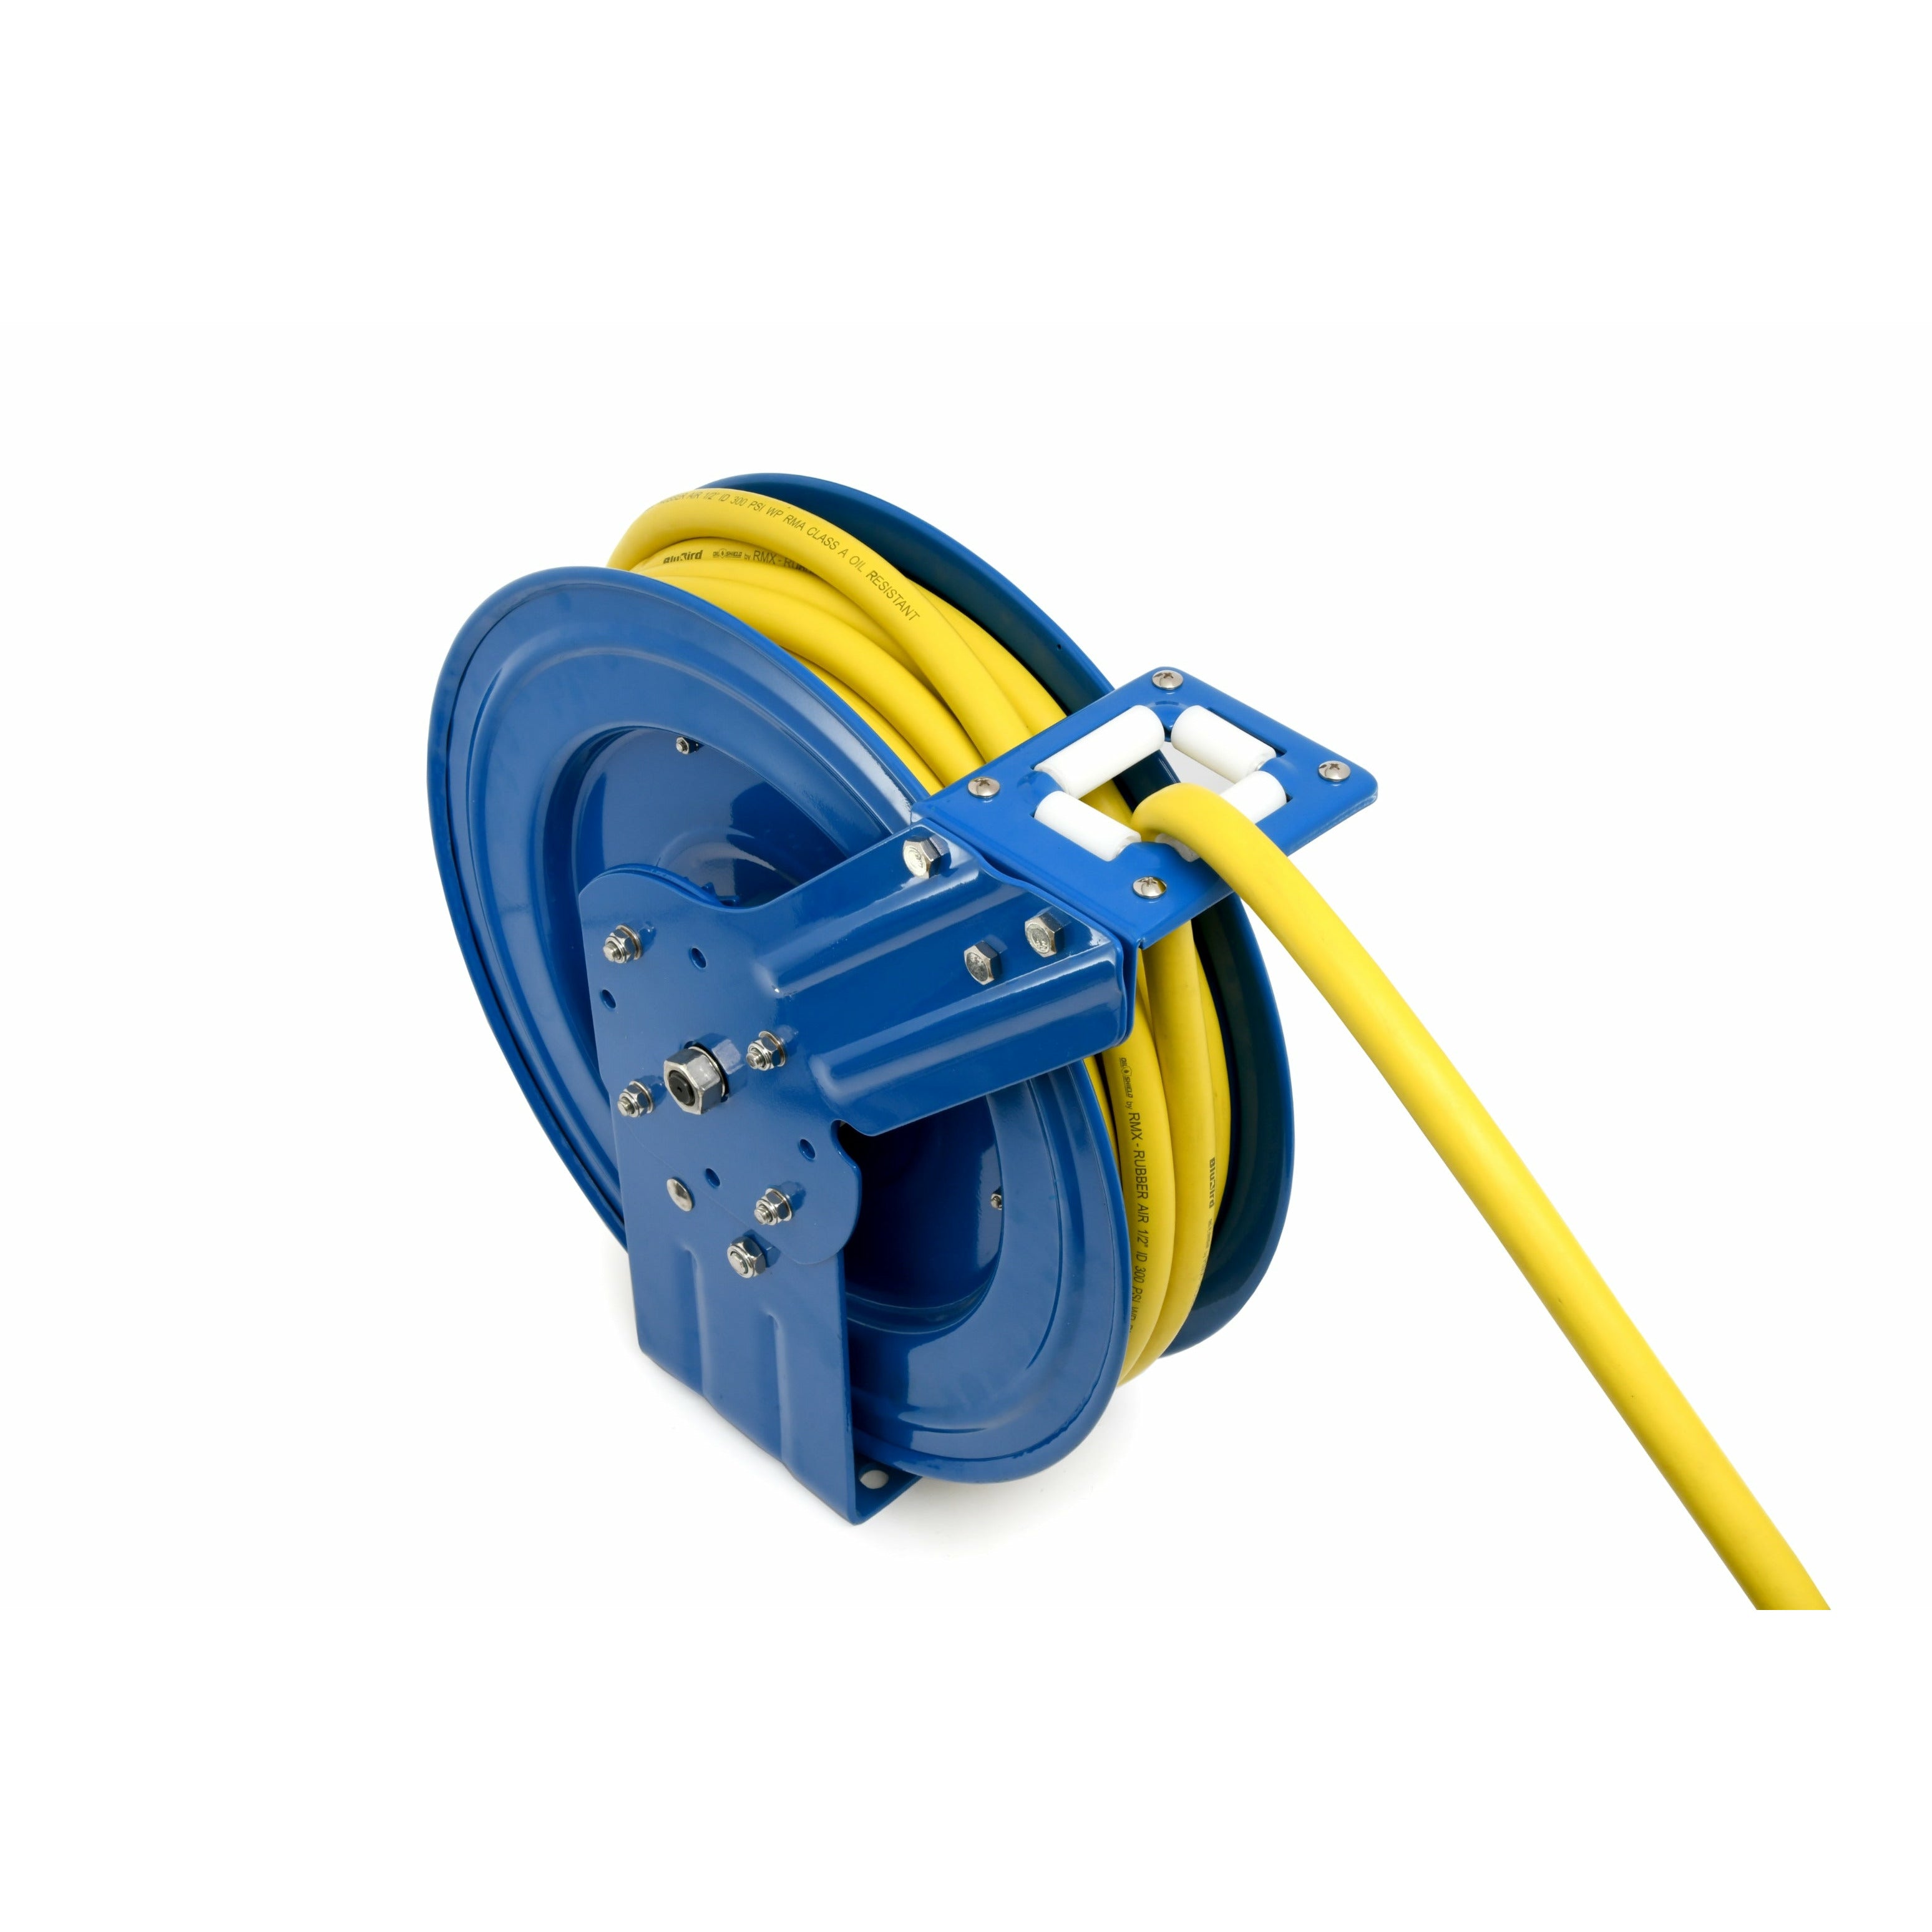 OIL SHIELD OSRHD3850 18 ga. Retractable Hose Reel with 3/8 x 50' Air Hose,  3' Lead-in Hose, Next-Gen Ultra-Light and Super Strong Rubber, 12 Point